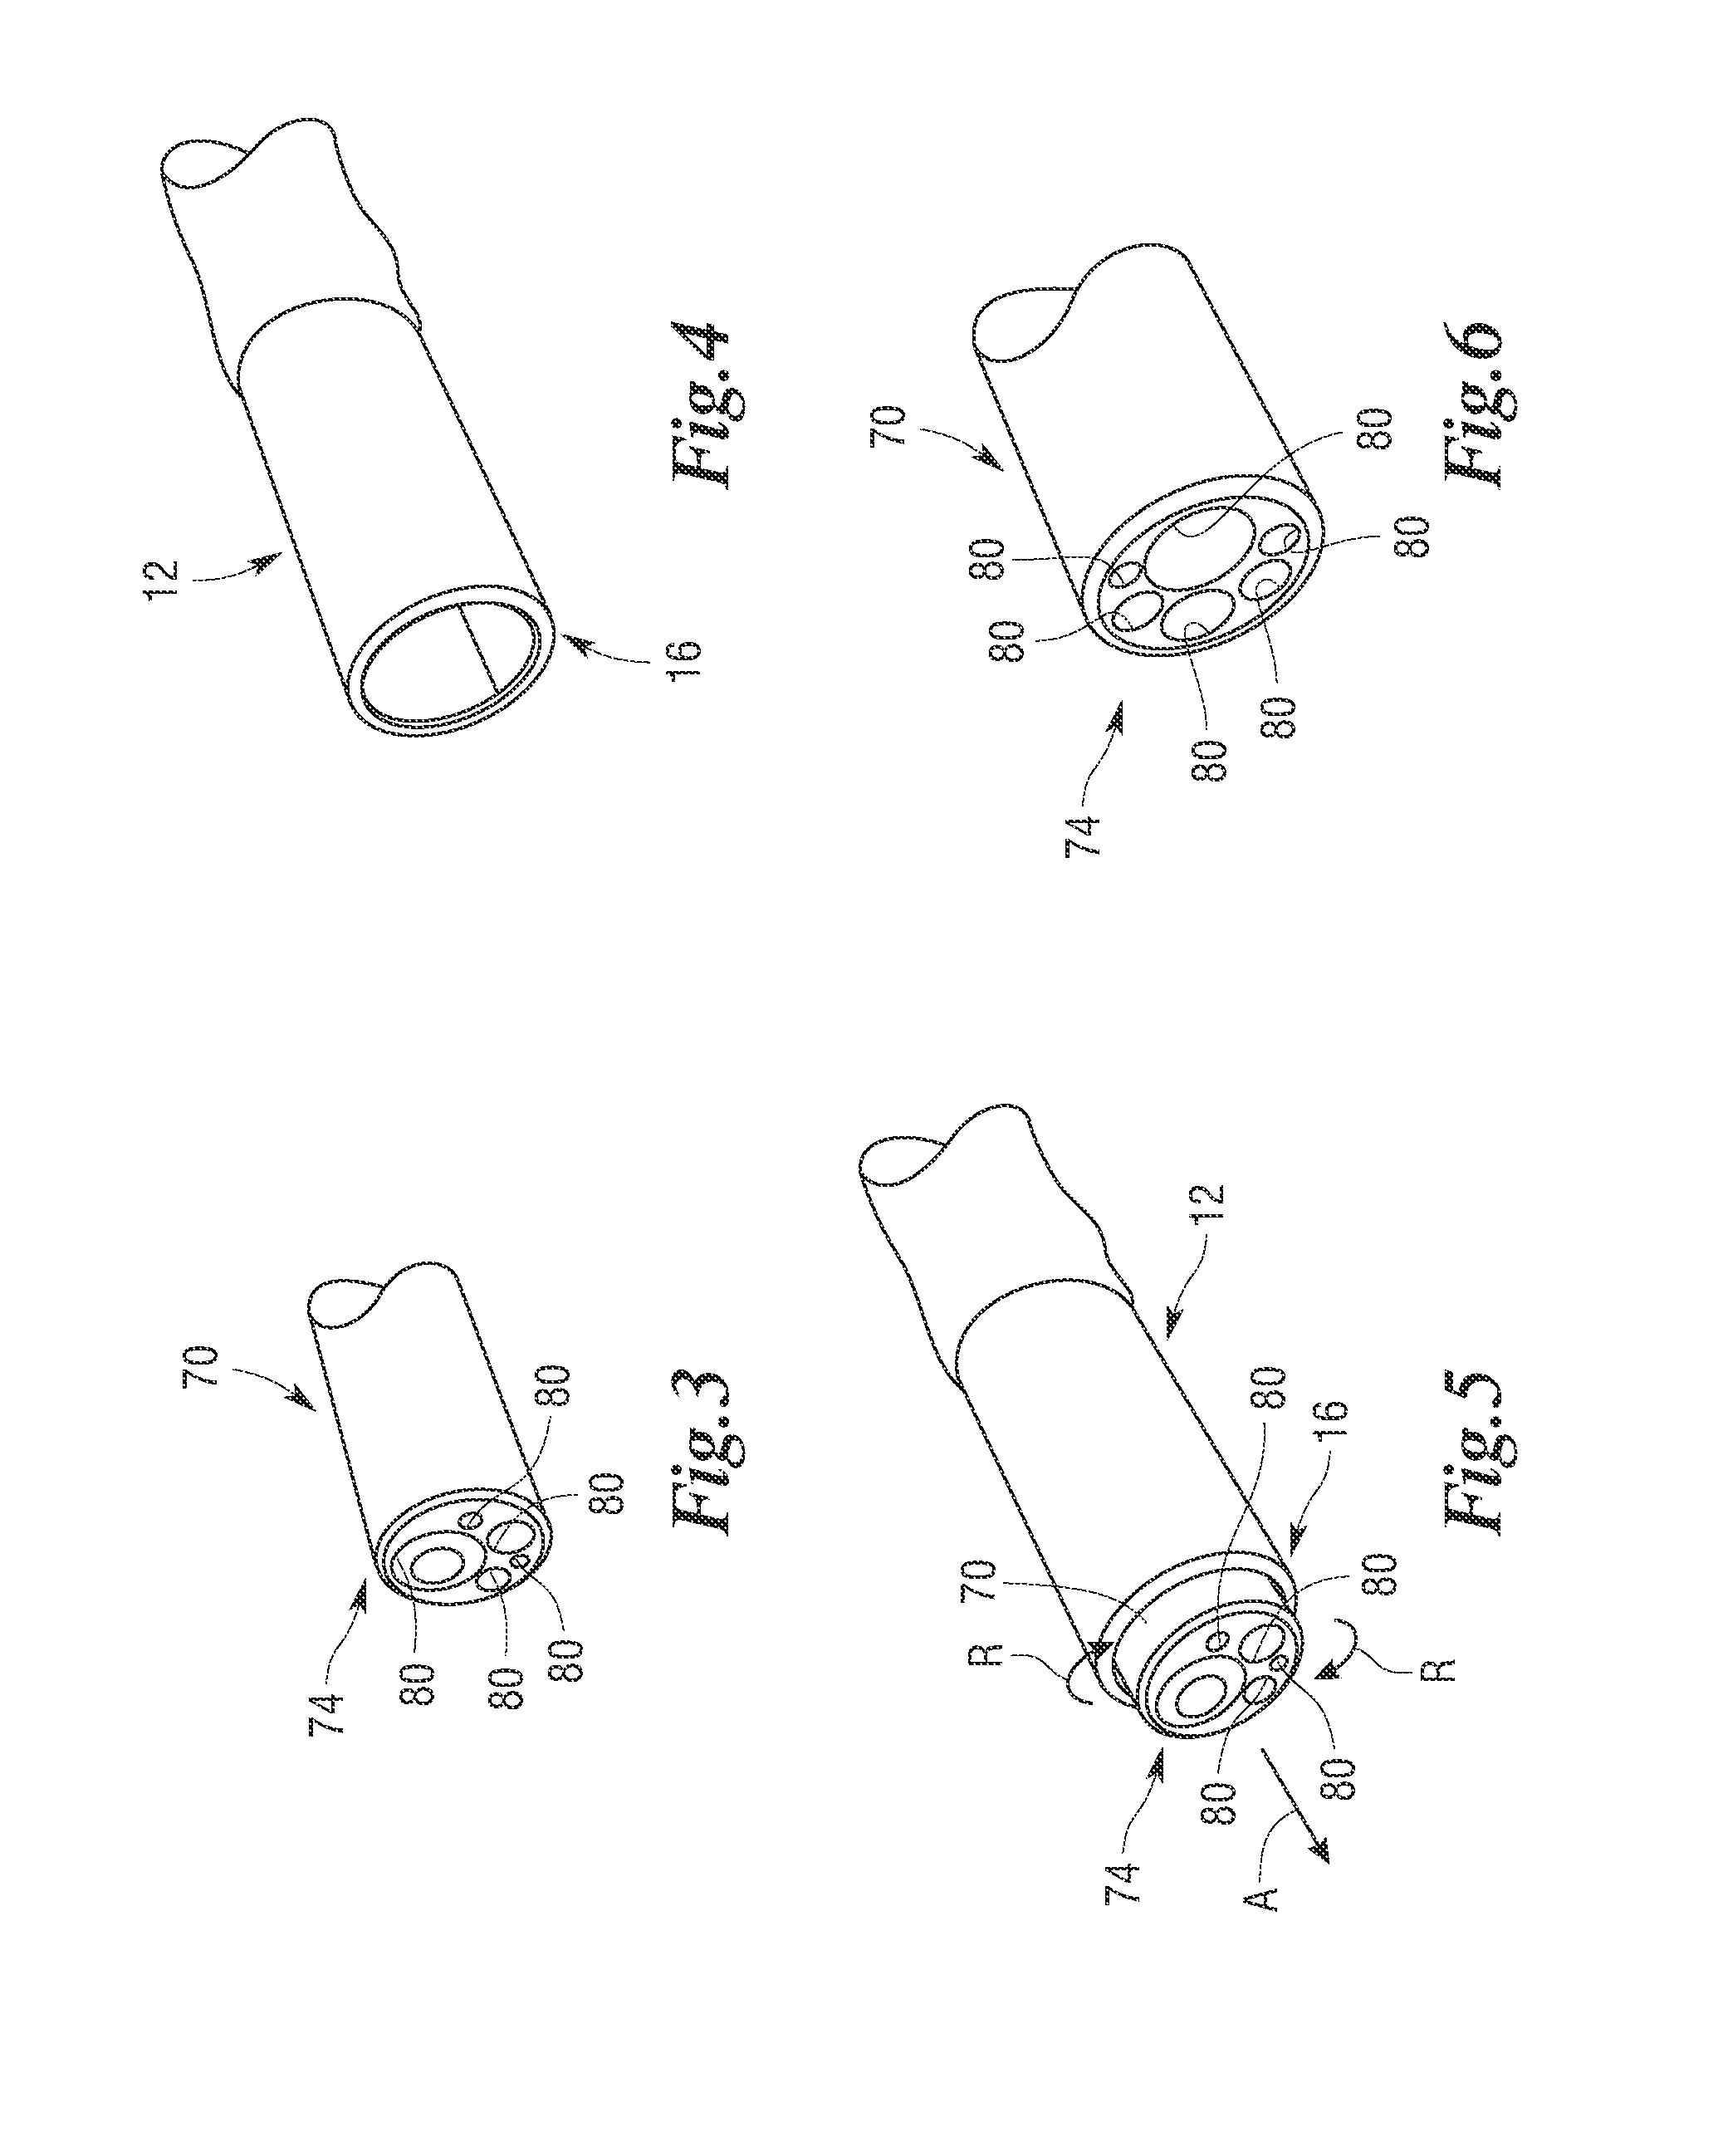 Manipulatable guide system and methods for natural orifice translumenal endoscopic surgery